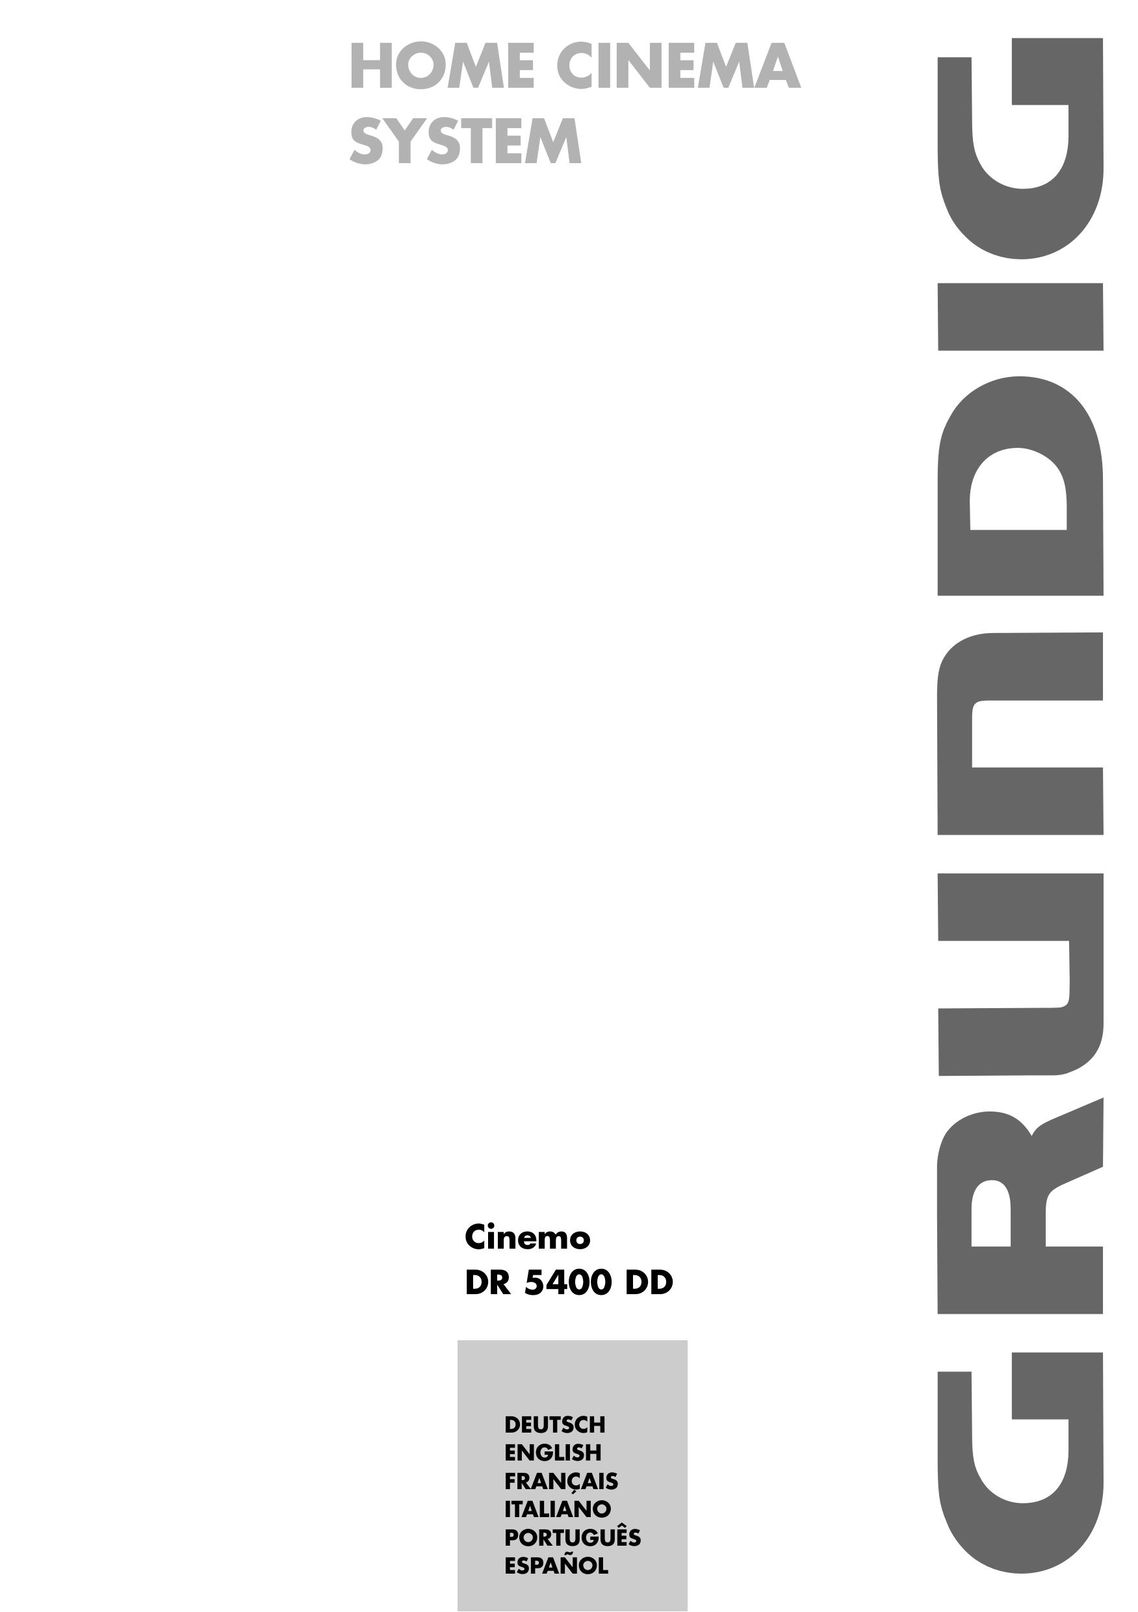 Grundig dr 5400 dd Home Theater System User Manual